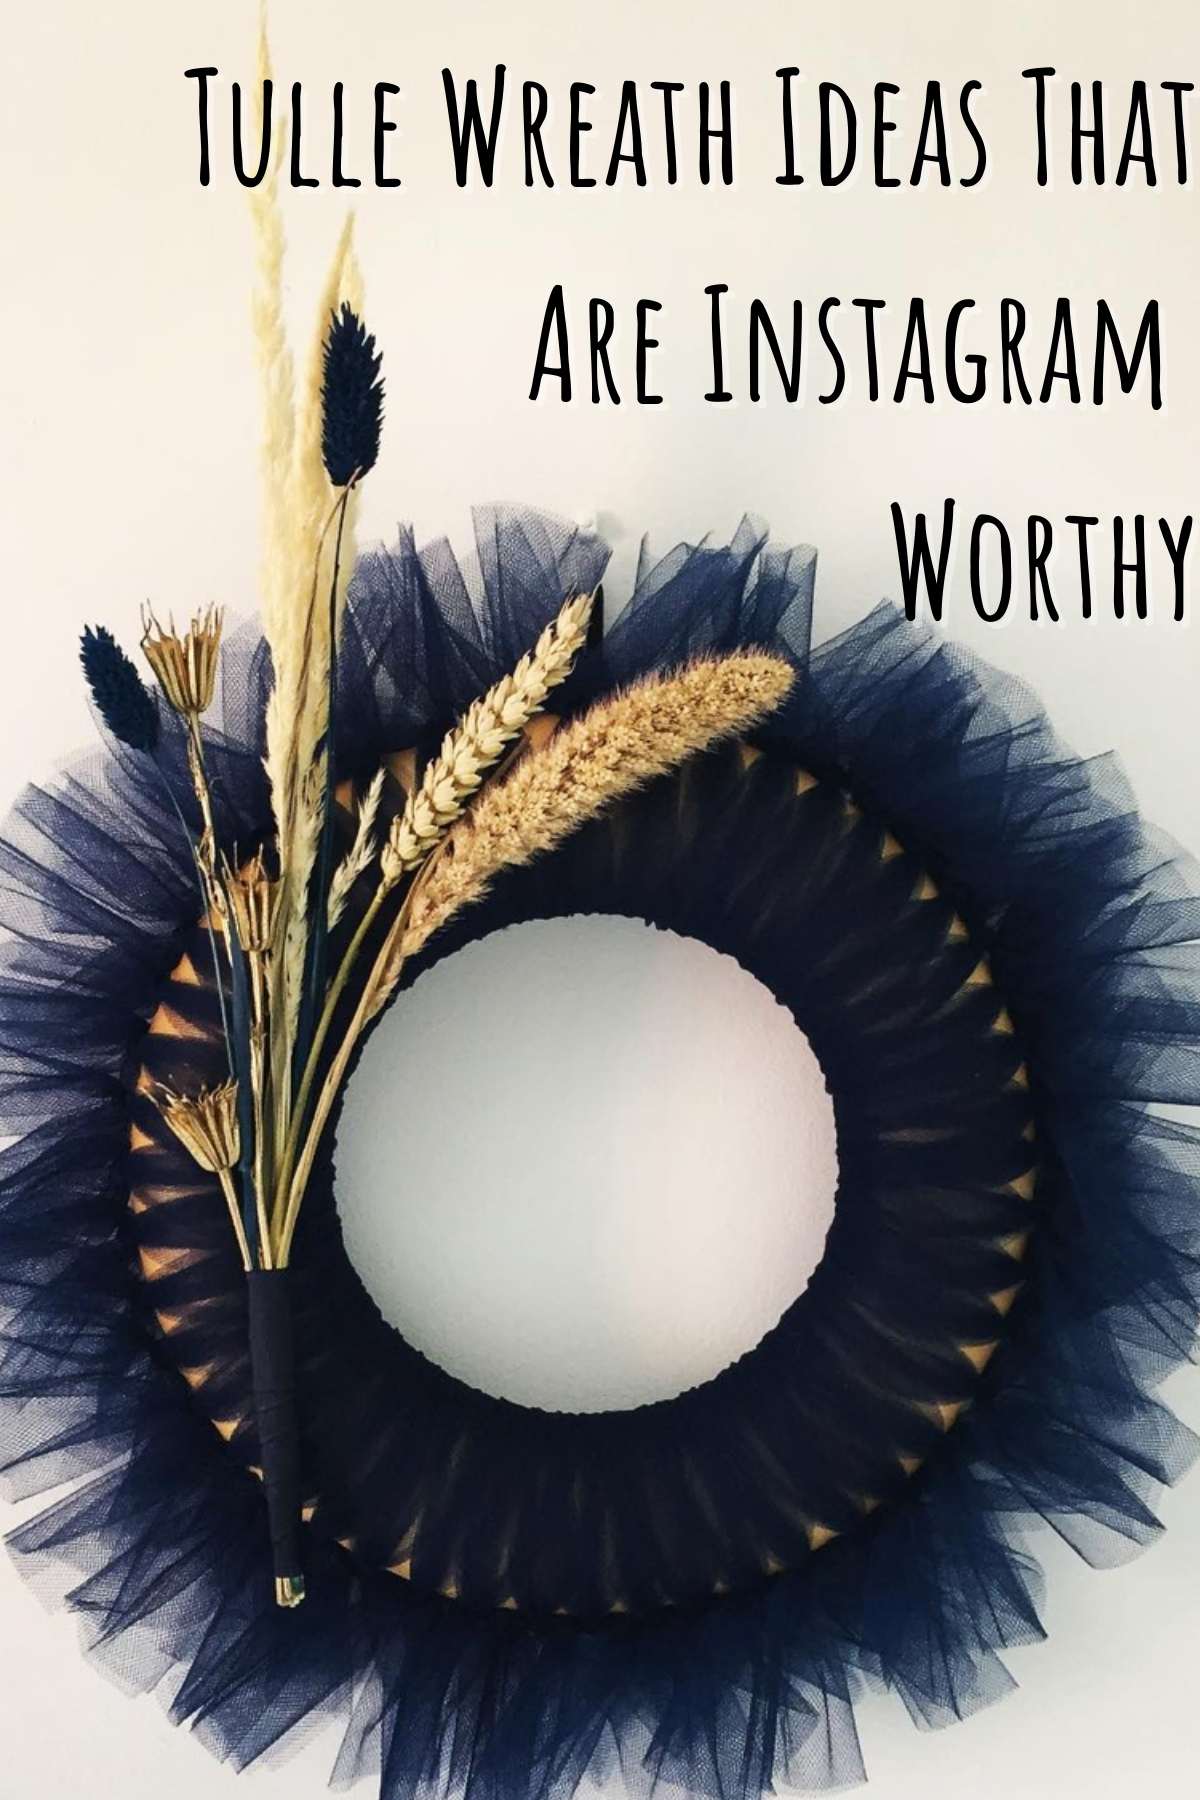 Tulle wreath ideas that are instagram worthy. Photo of black wreath.